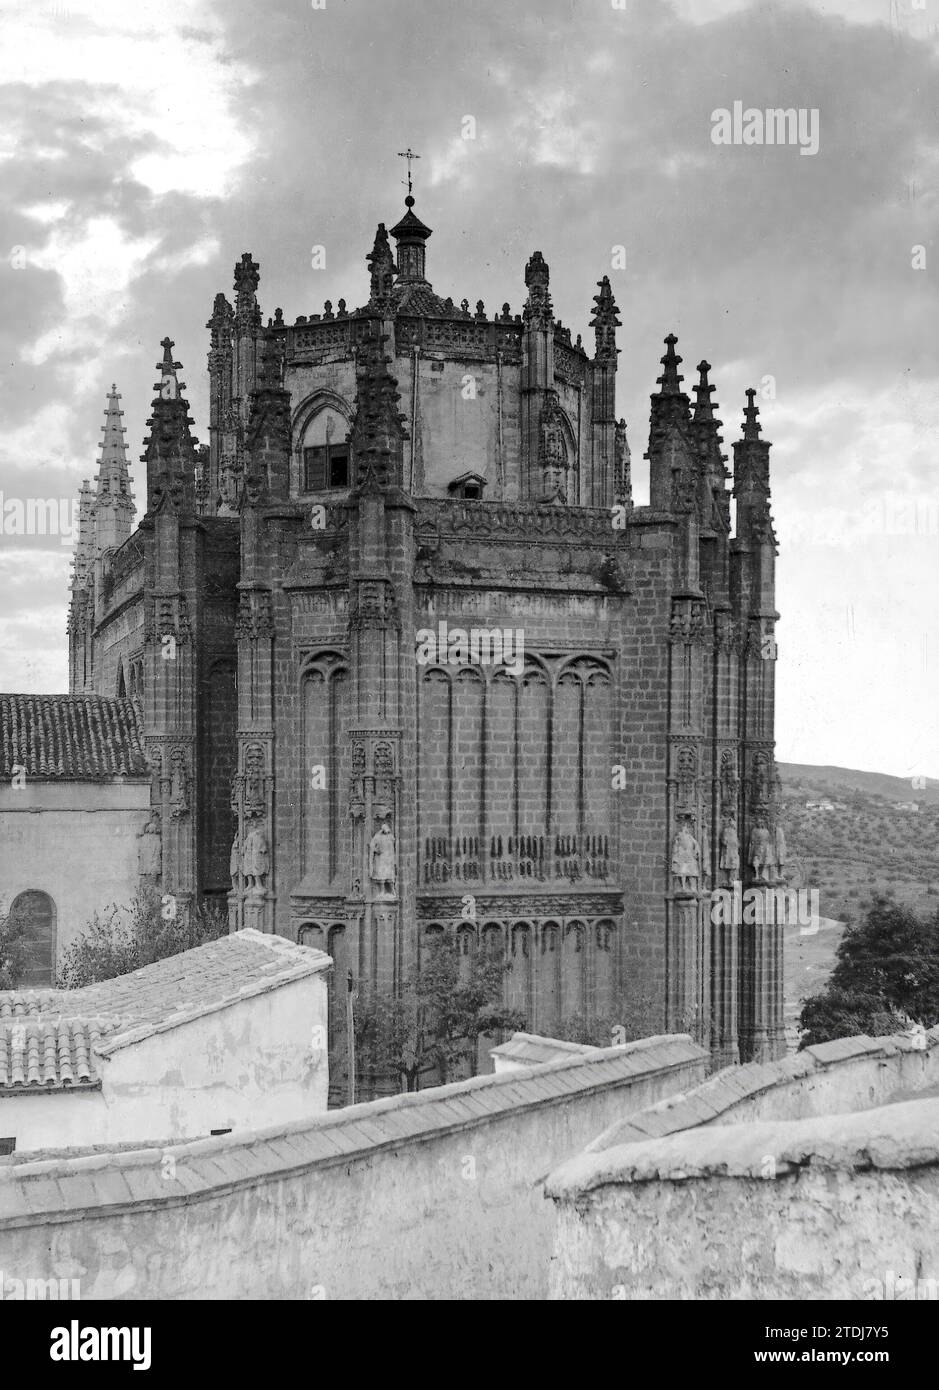 12/31/1921. Toledo. A lawsuit that Interests the noble City. Wonderful apse of the monumental church of San Juan de los Reyes, which is intended to be joined with a Modern fence to the anti-artistic building of the School of Arts and Crafts. (photo Pedro Román) -. Credit: Album / Archivo ABC / Pedro Román Stock Photo